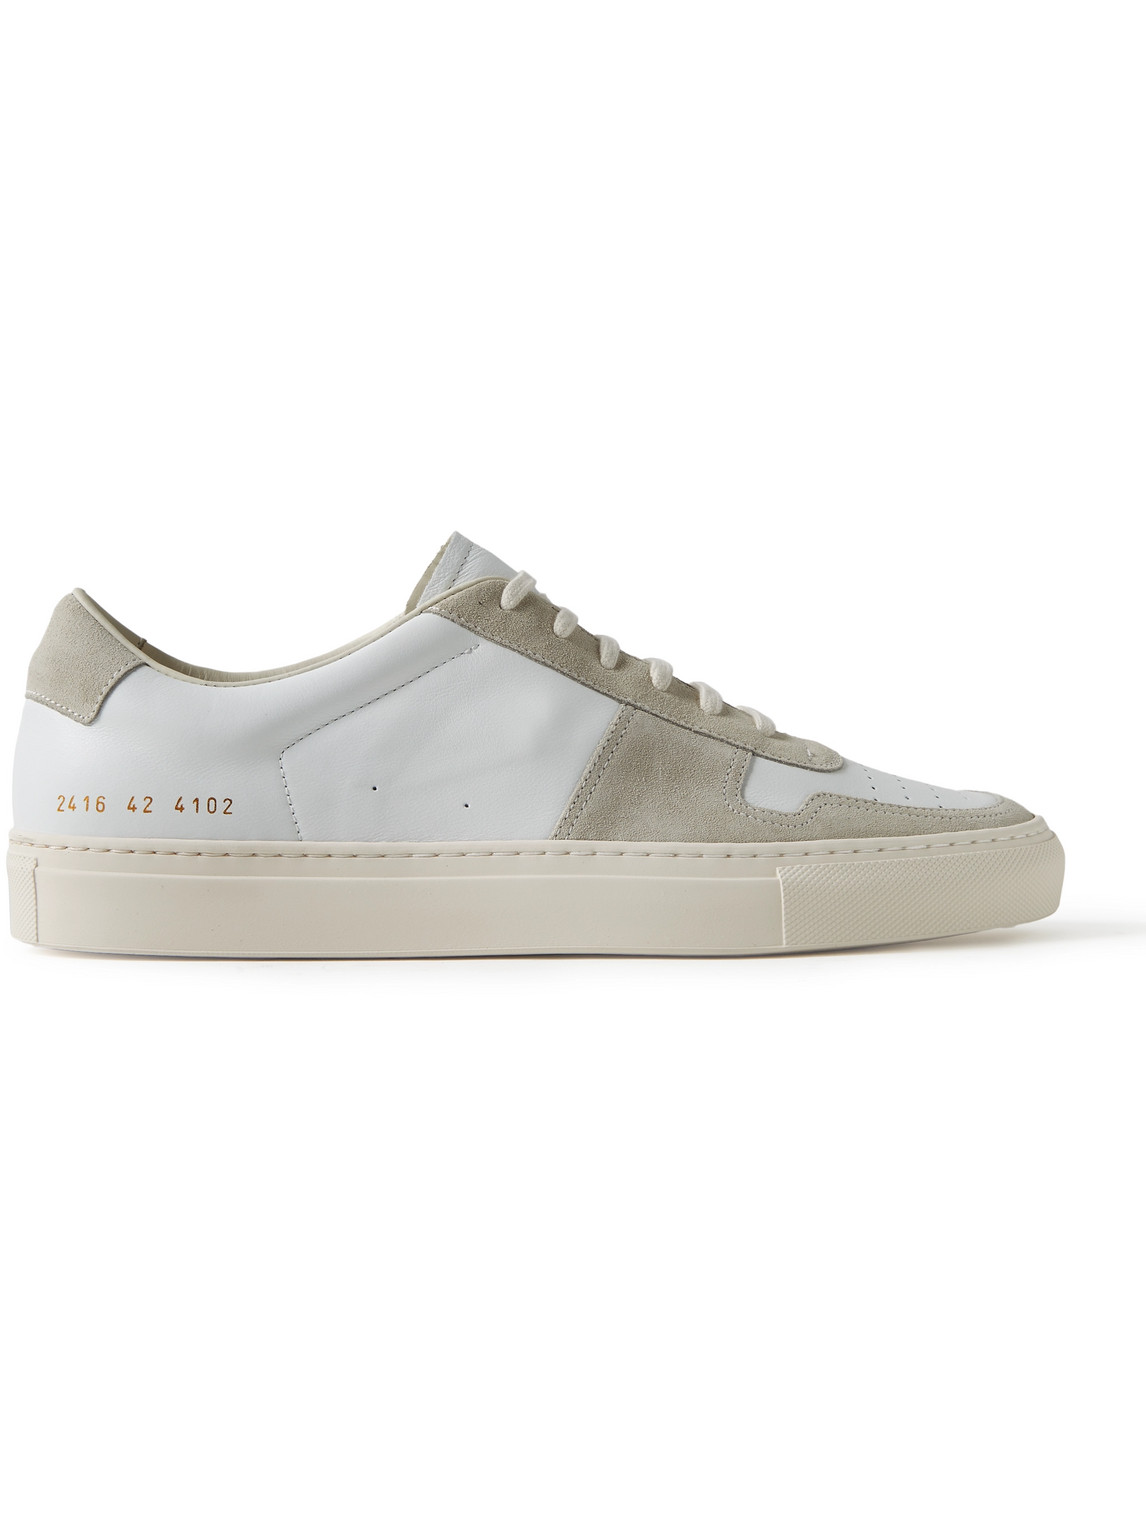 Common Projects Bball Suede-trimmed Leather Sneakers In Neutrals